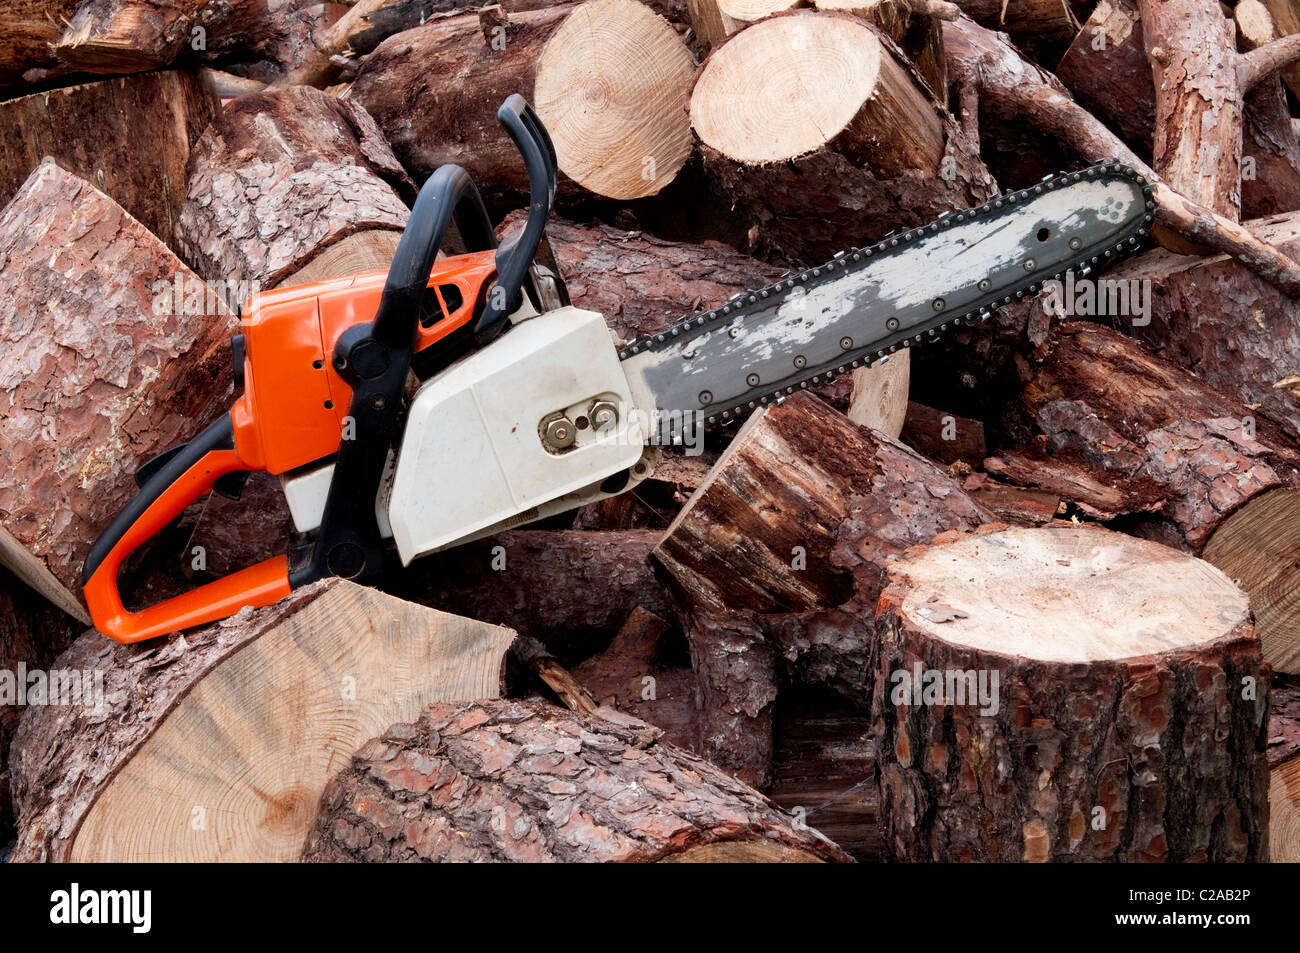 A chain saw sitting on a pile of logs Stock Photo